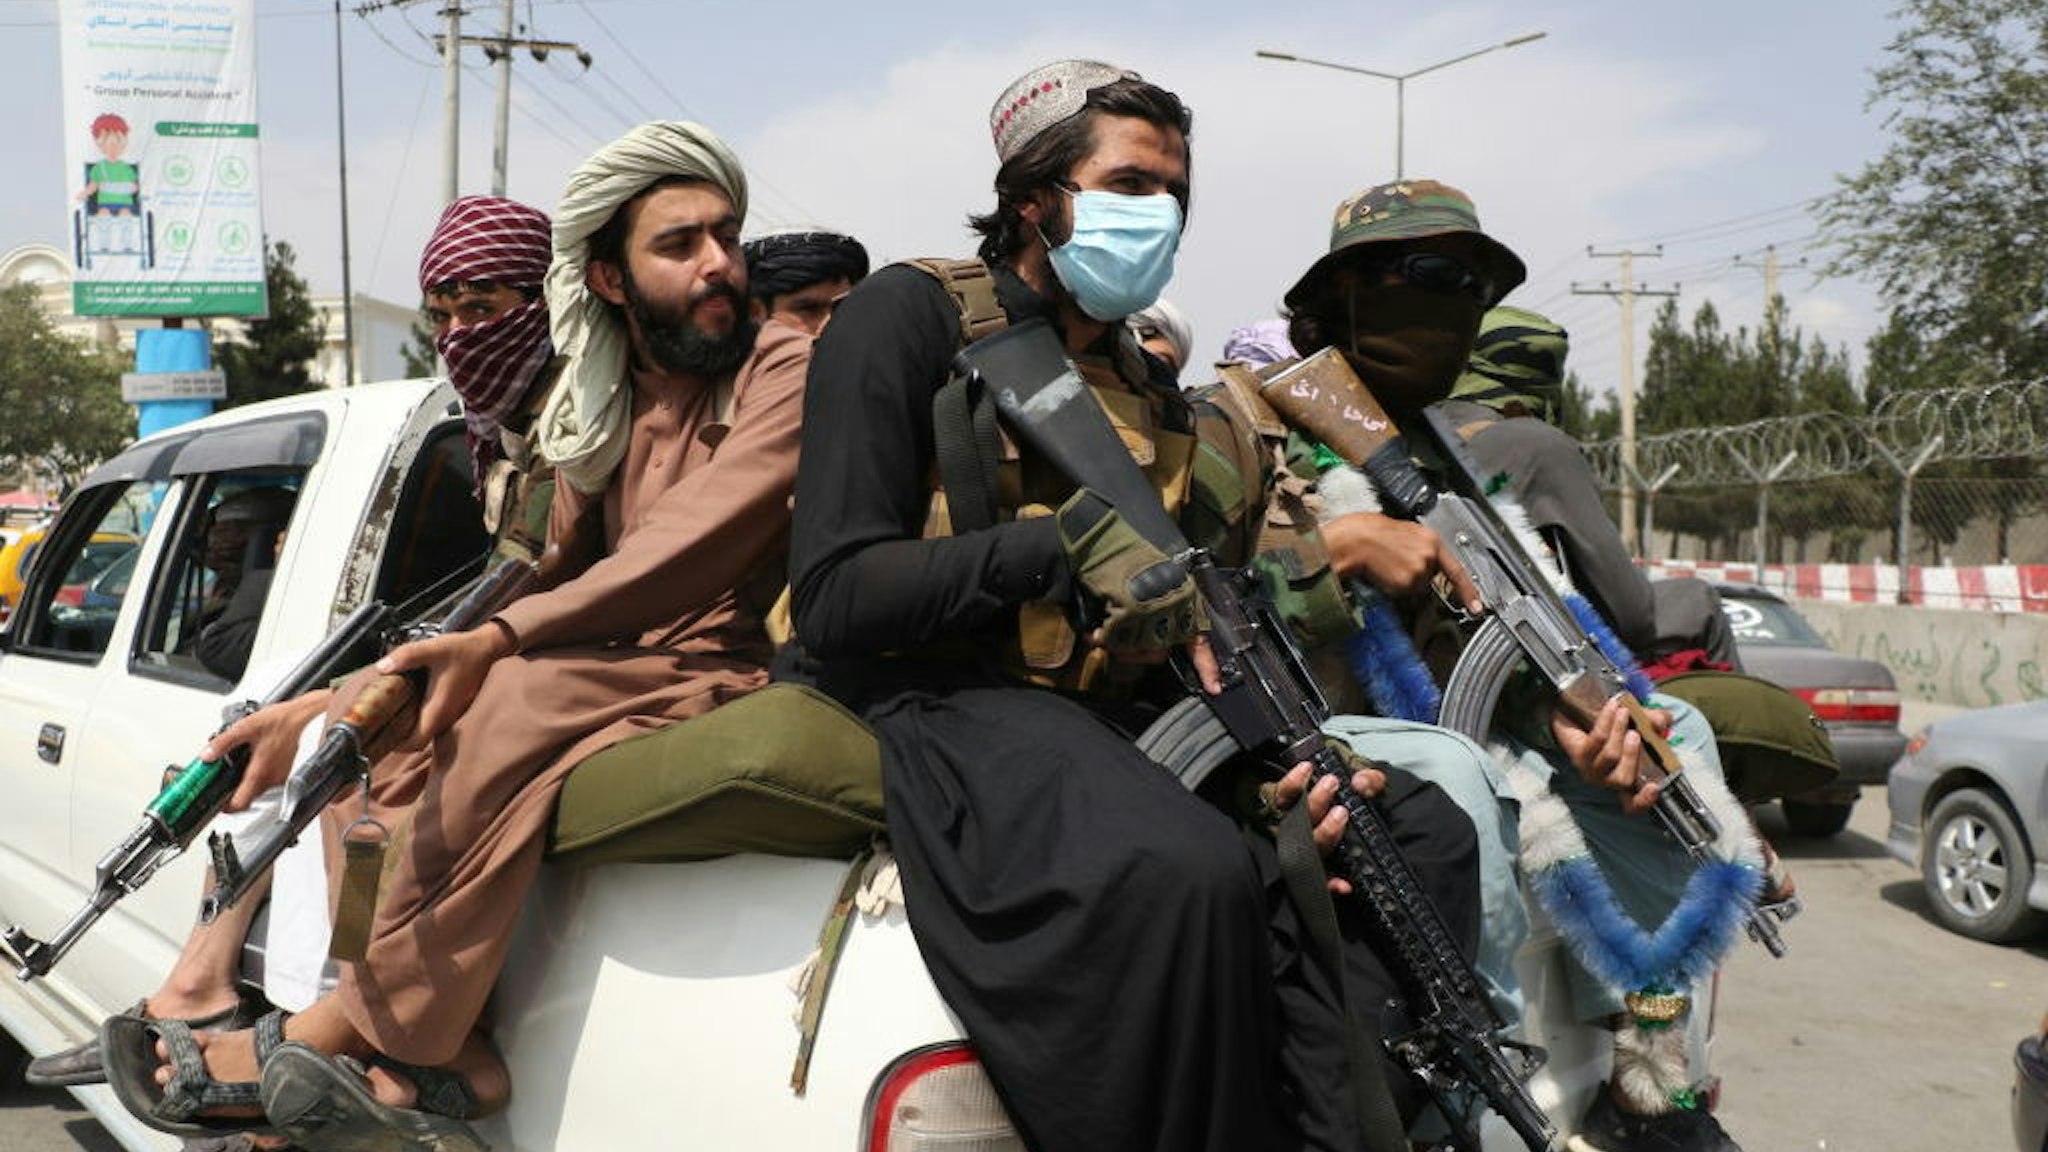 KABUL, AFGHANISTAN - AUGUST 31: Taliban take control of Hamid Karzai International Airport after the completion of the U.S. withdrawal from Afghanistan, in Kabul, Afghanistan on August 31, 2021. (Photo by Wali Sabawoon/Anadolu Agency via Getty Images)